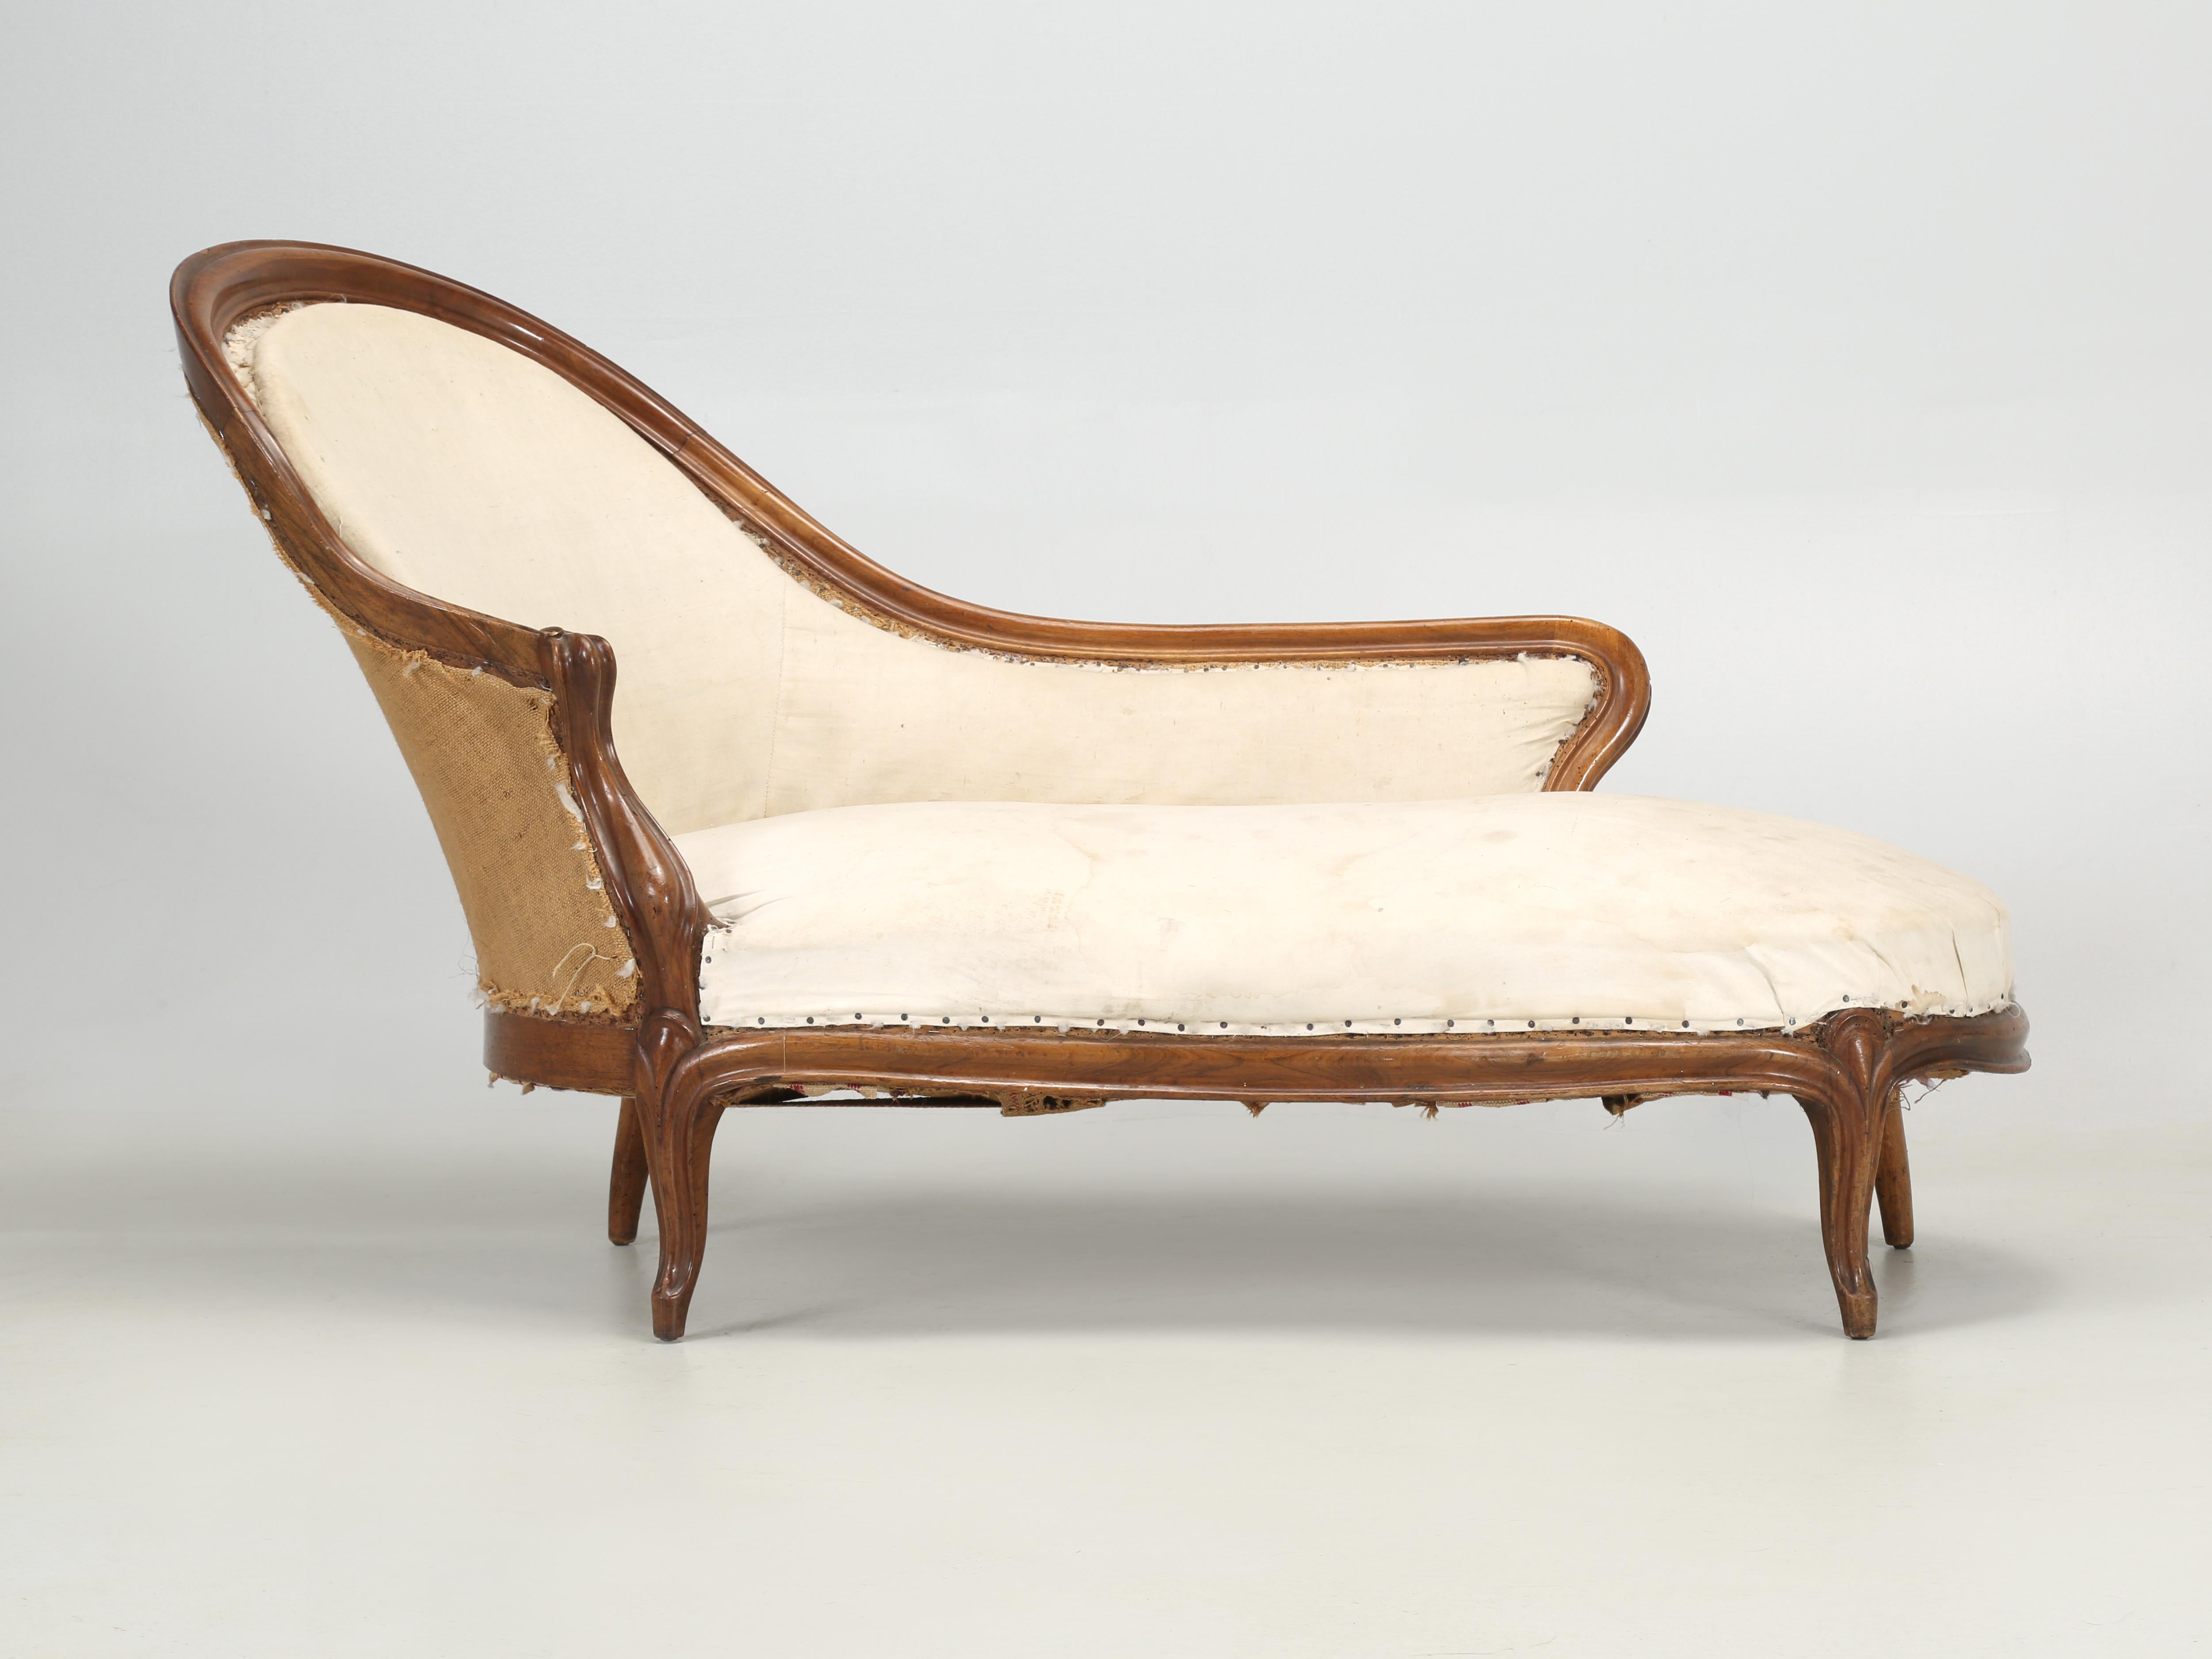 Antique French Louis XV style Chaise Longue from the 19th century in need of new upholstery. The frame of our méridienne style French chaise lounge, is made from a beautiful figured French walnut, indicating it was a higher quality item than the